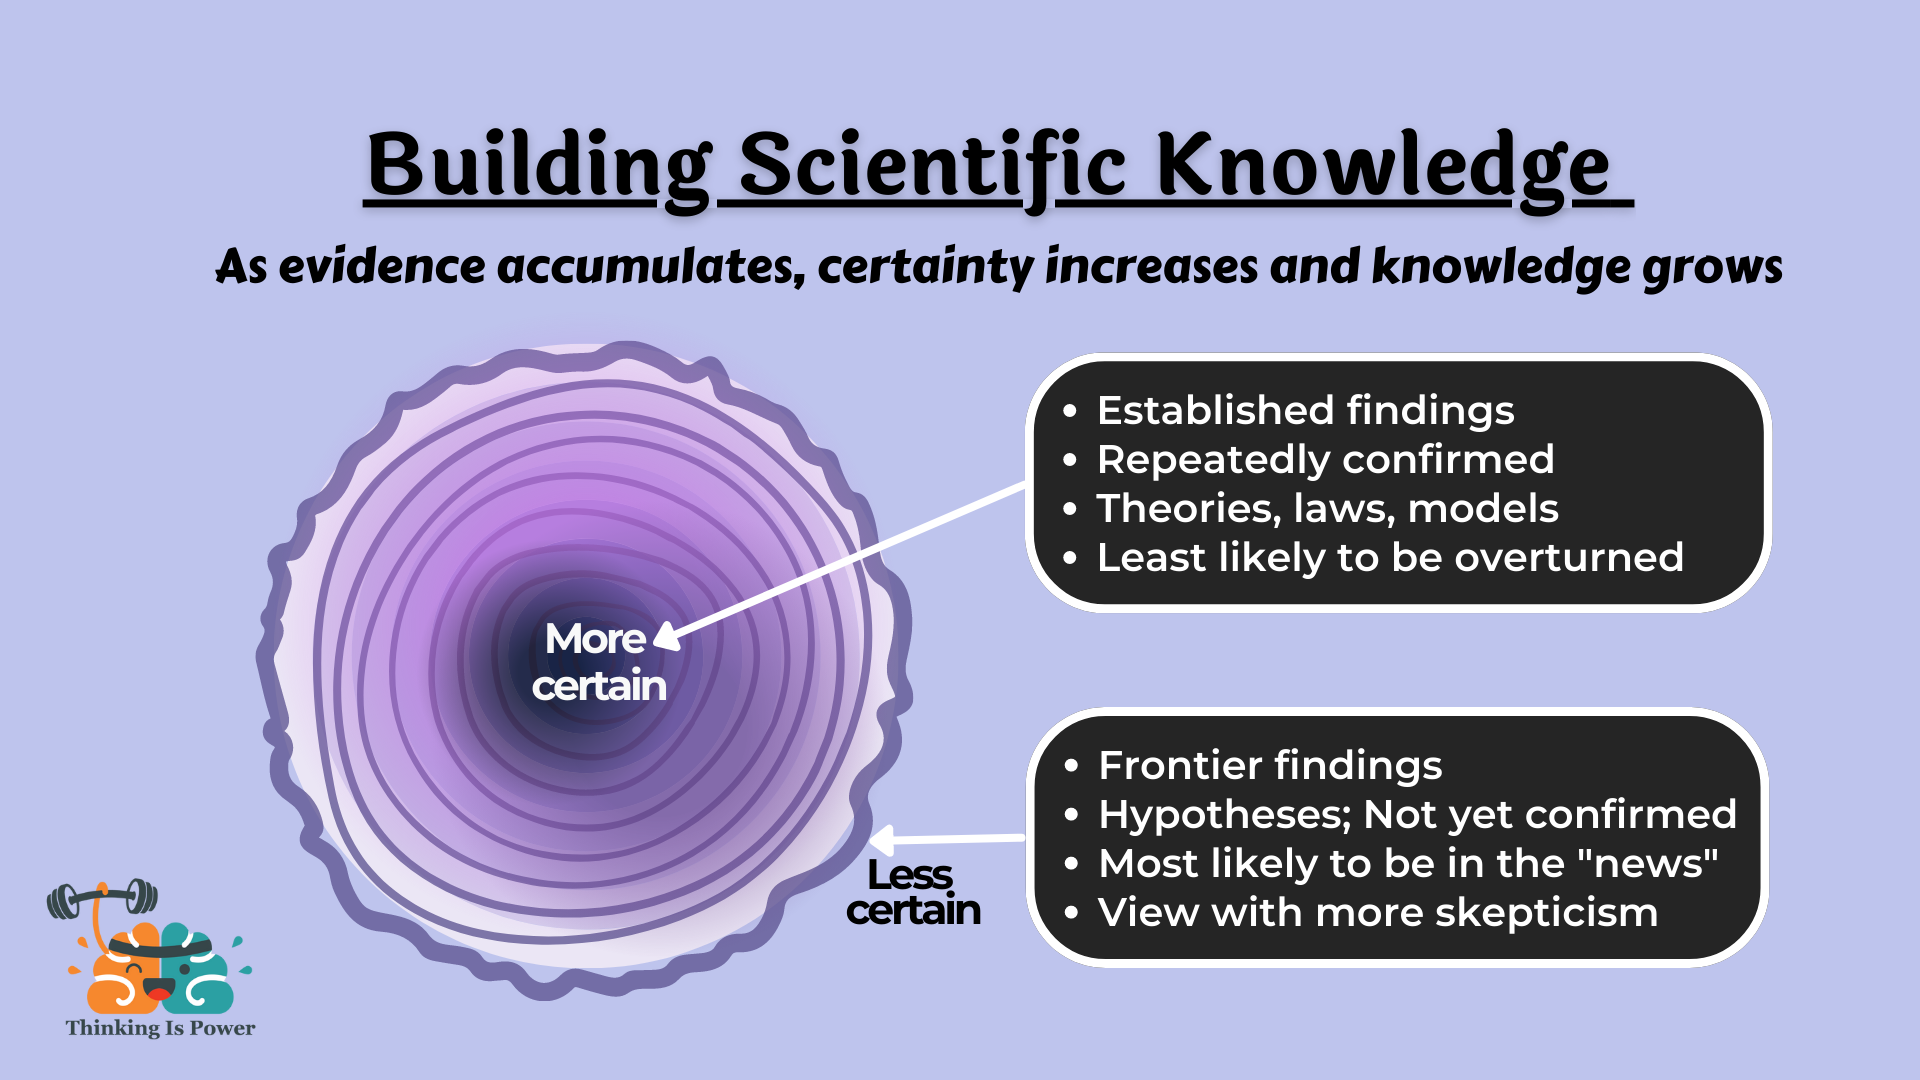 Building scientific knowledge: As evidence accumulates, certainty increases and knowledge grows. More certain: Established findings, repeatedly confirmed, theories, laws, models, least likely to be overturned. Less certain: Frontier findings, hypotheses/not yet confirmed, most likely to be in the news, view with more skepticism.